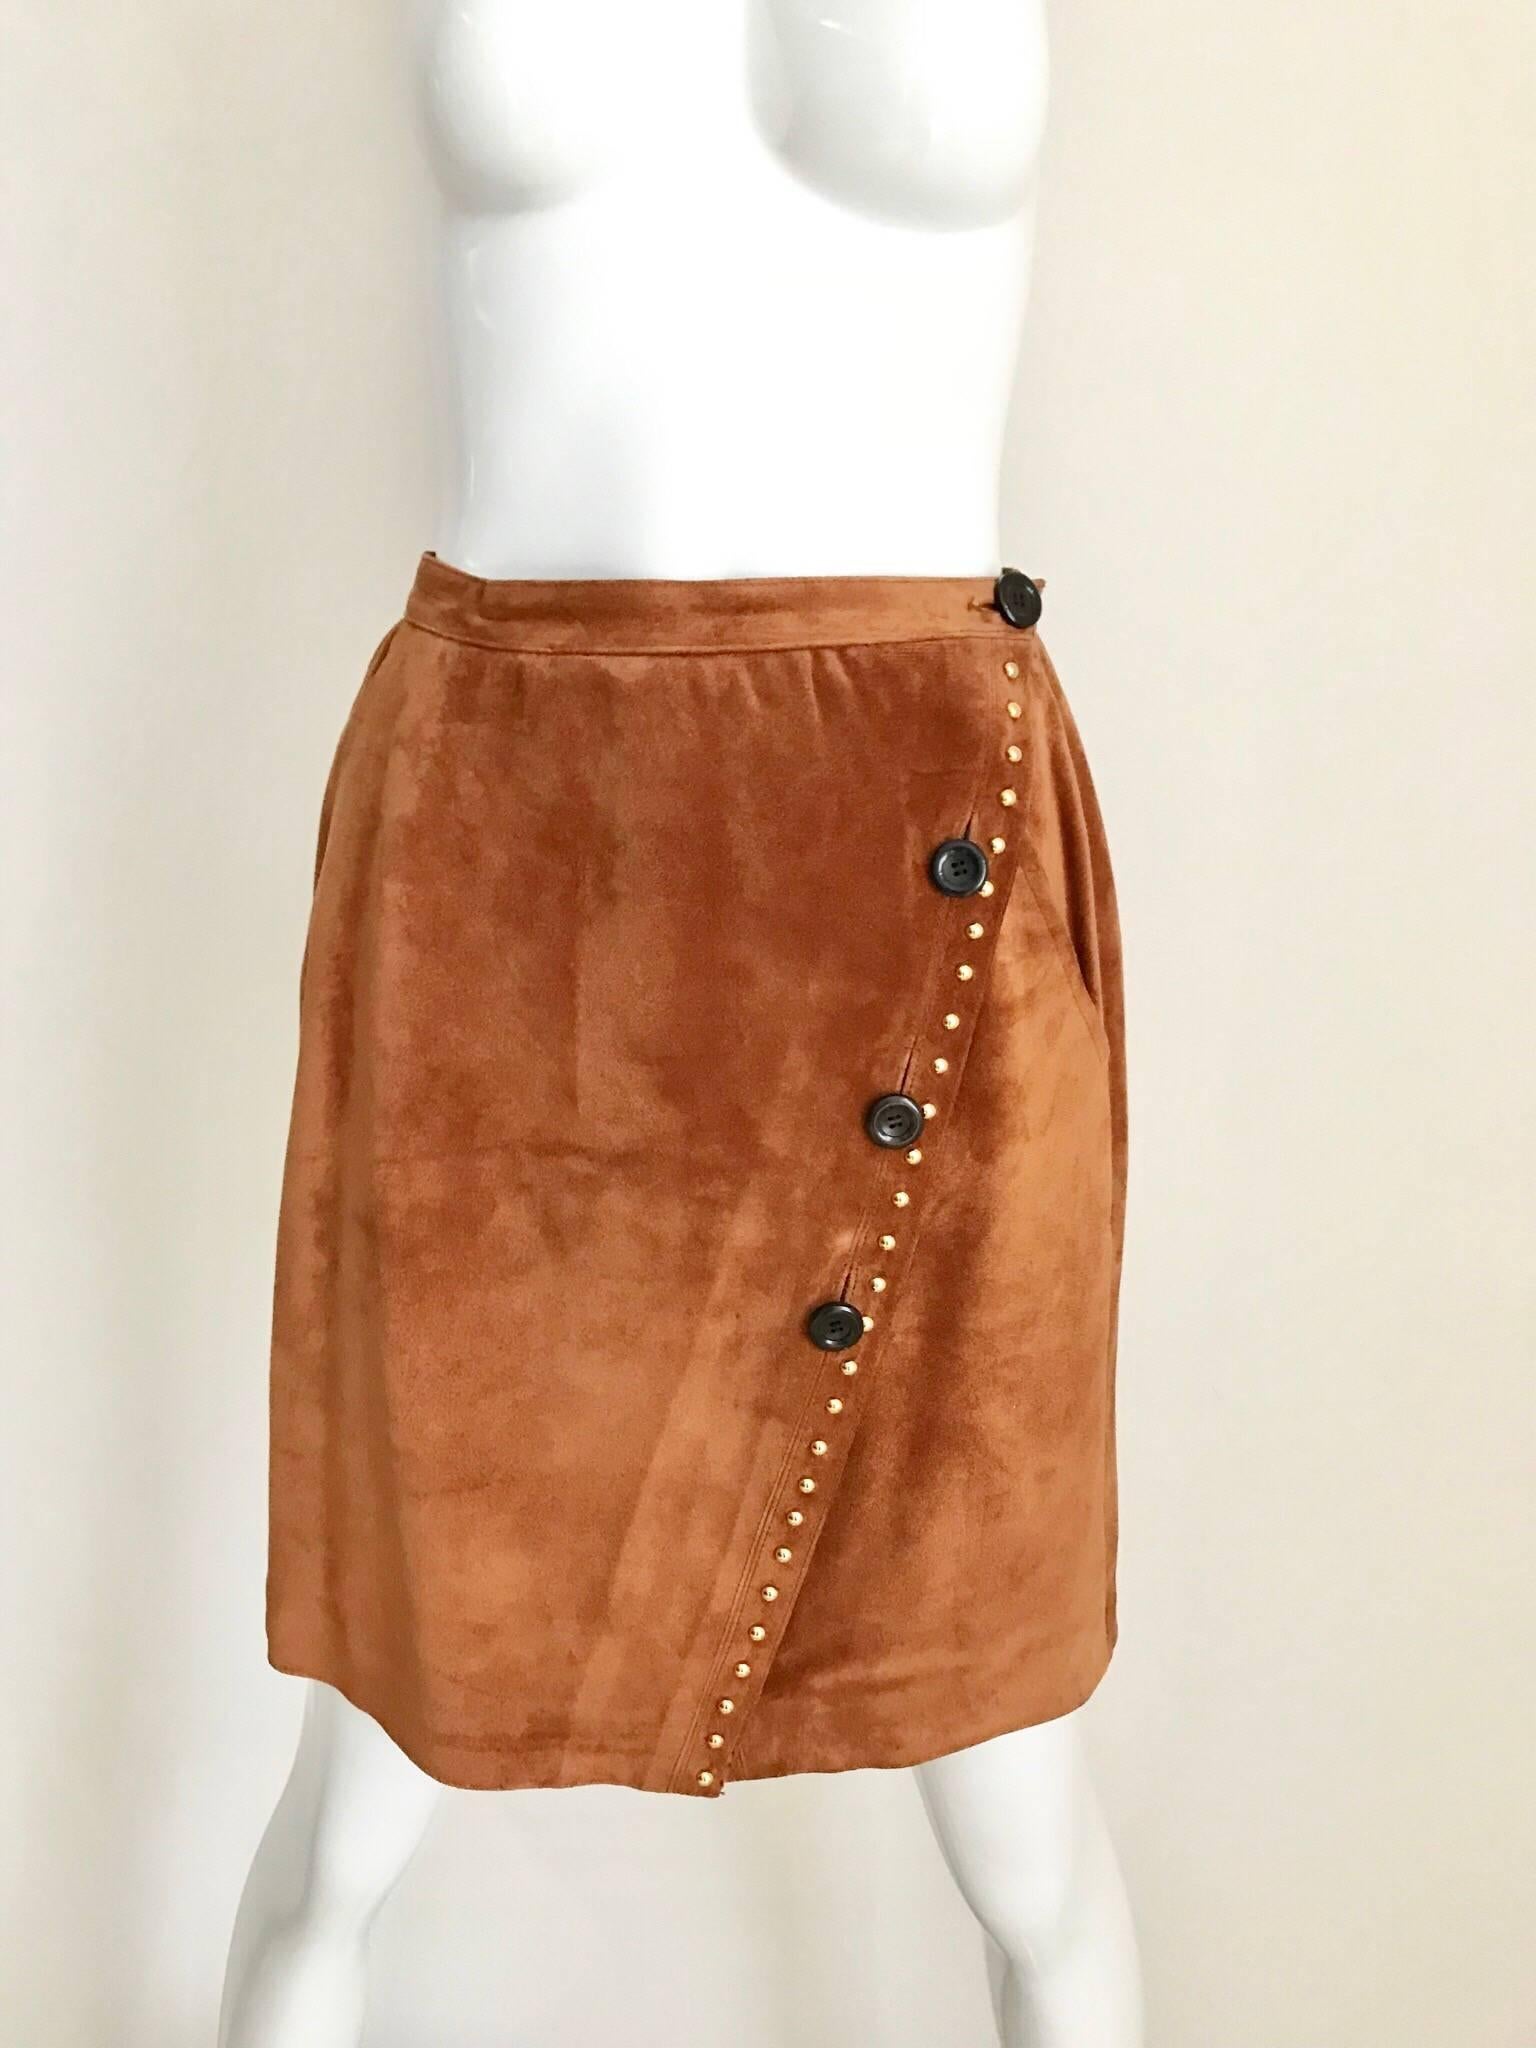 1980s Yves Saint Laurent Brown Suede Jacket and Skirt Set ensemble.
Wrap skirt with button. Jacket has large 4 pockets and shoulder pads.
Jacket measurement:  36 inches bust
Skirt measurement: 26 inches waist and 34 Hips